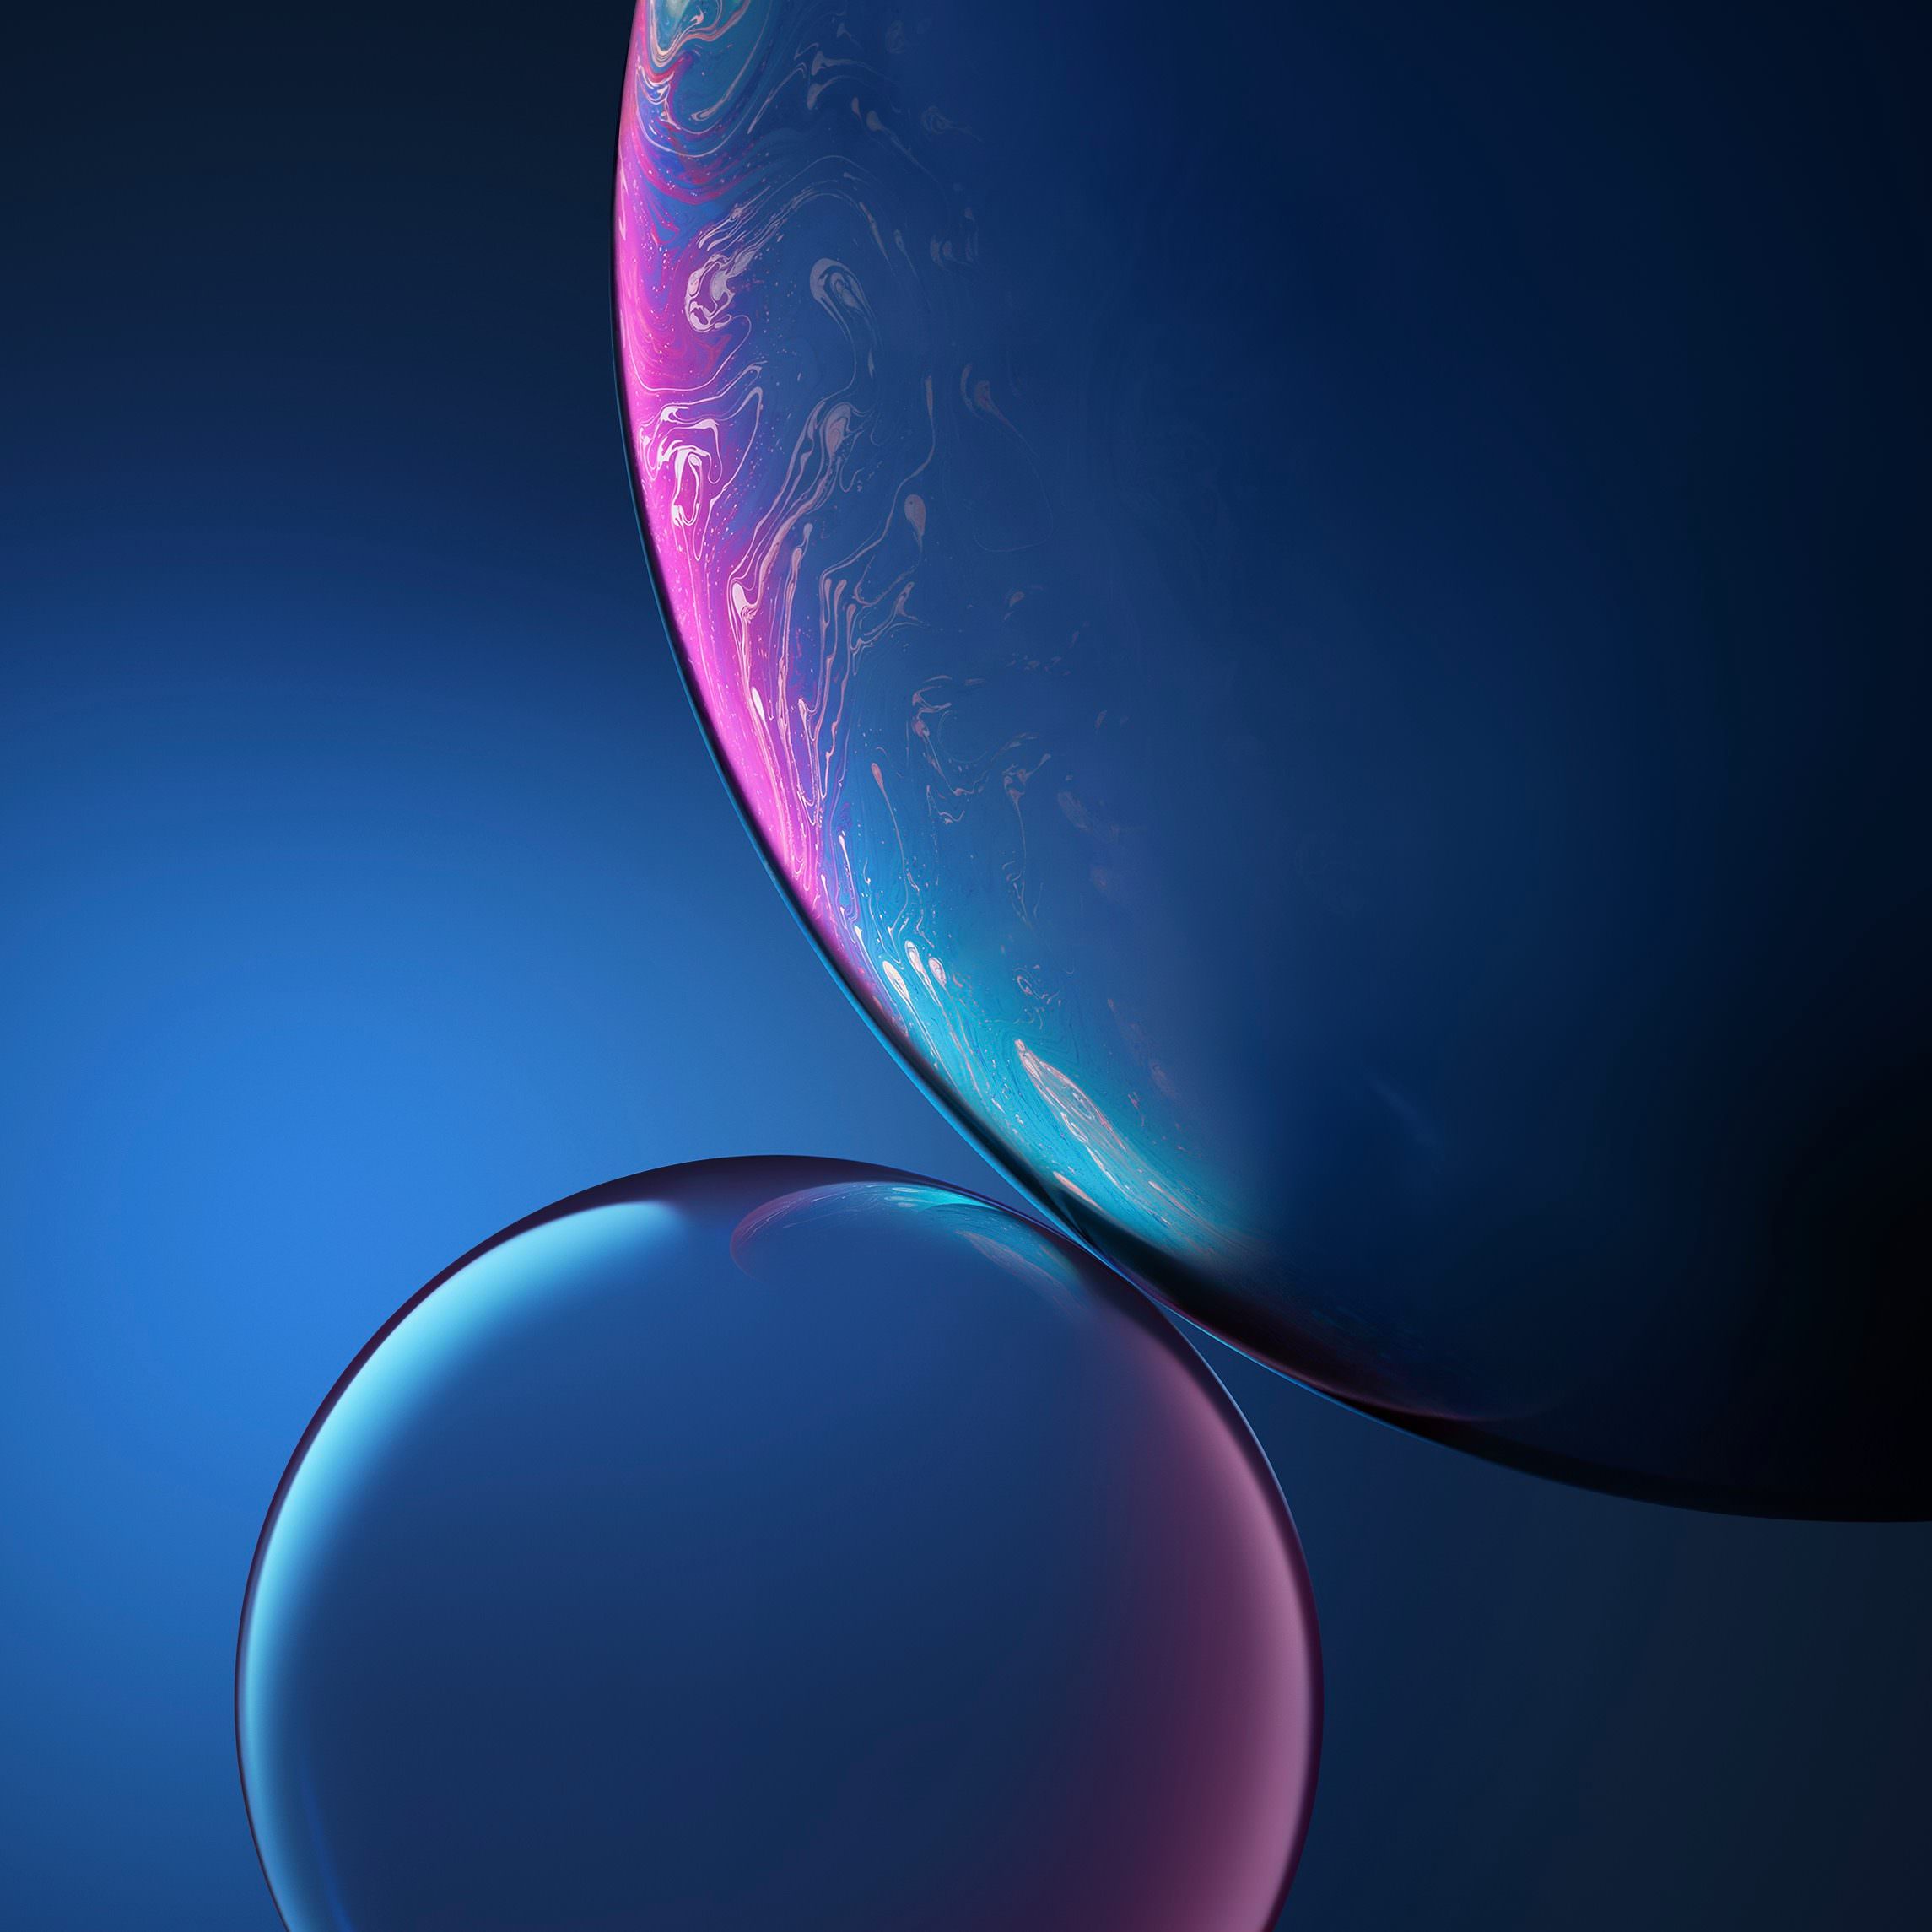 Download 12 iPhone XRs Exclusive Bubble Wallpapers Here